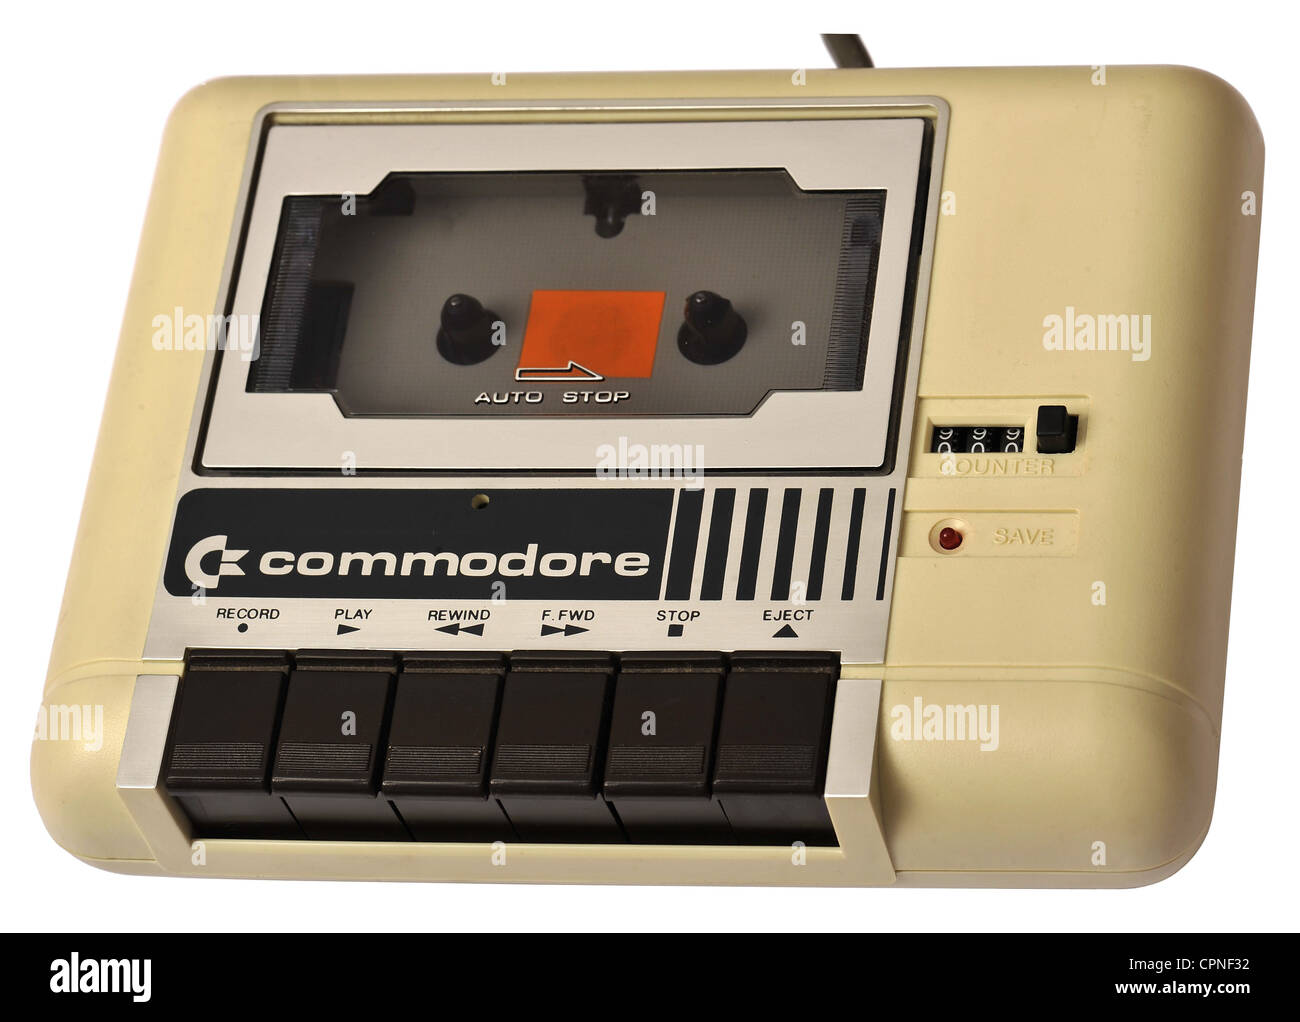 Computer / Elektronik, Commodore Datasette, Version Commodore 1530 Unit C2N Datasette, externer Speicher auf Kassette, für Computer, gemacht durch Commodore Electronics Ltd., Taiwan, 1983, Additional-Rights-Clearences-not available Stockfoto